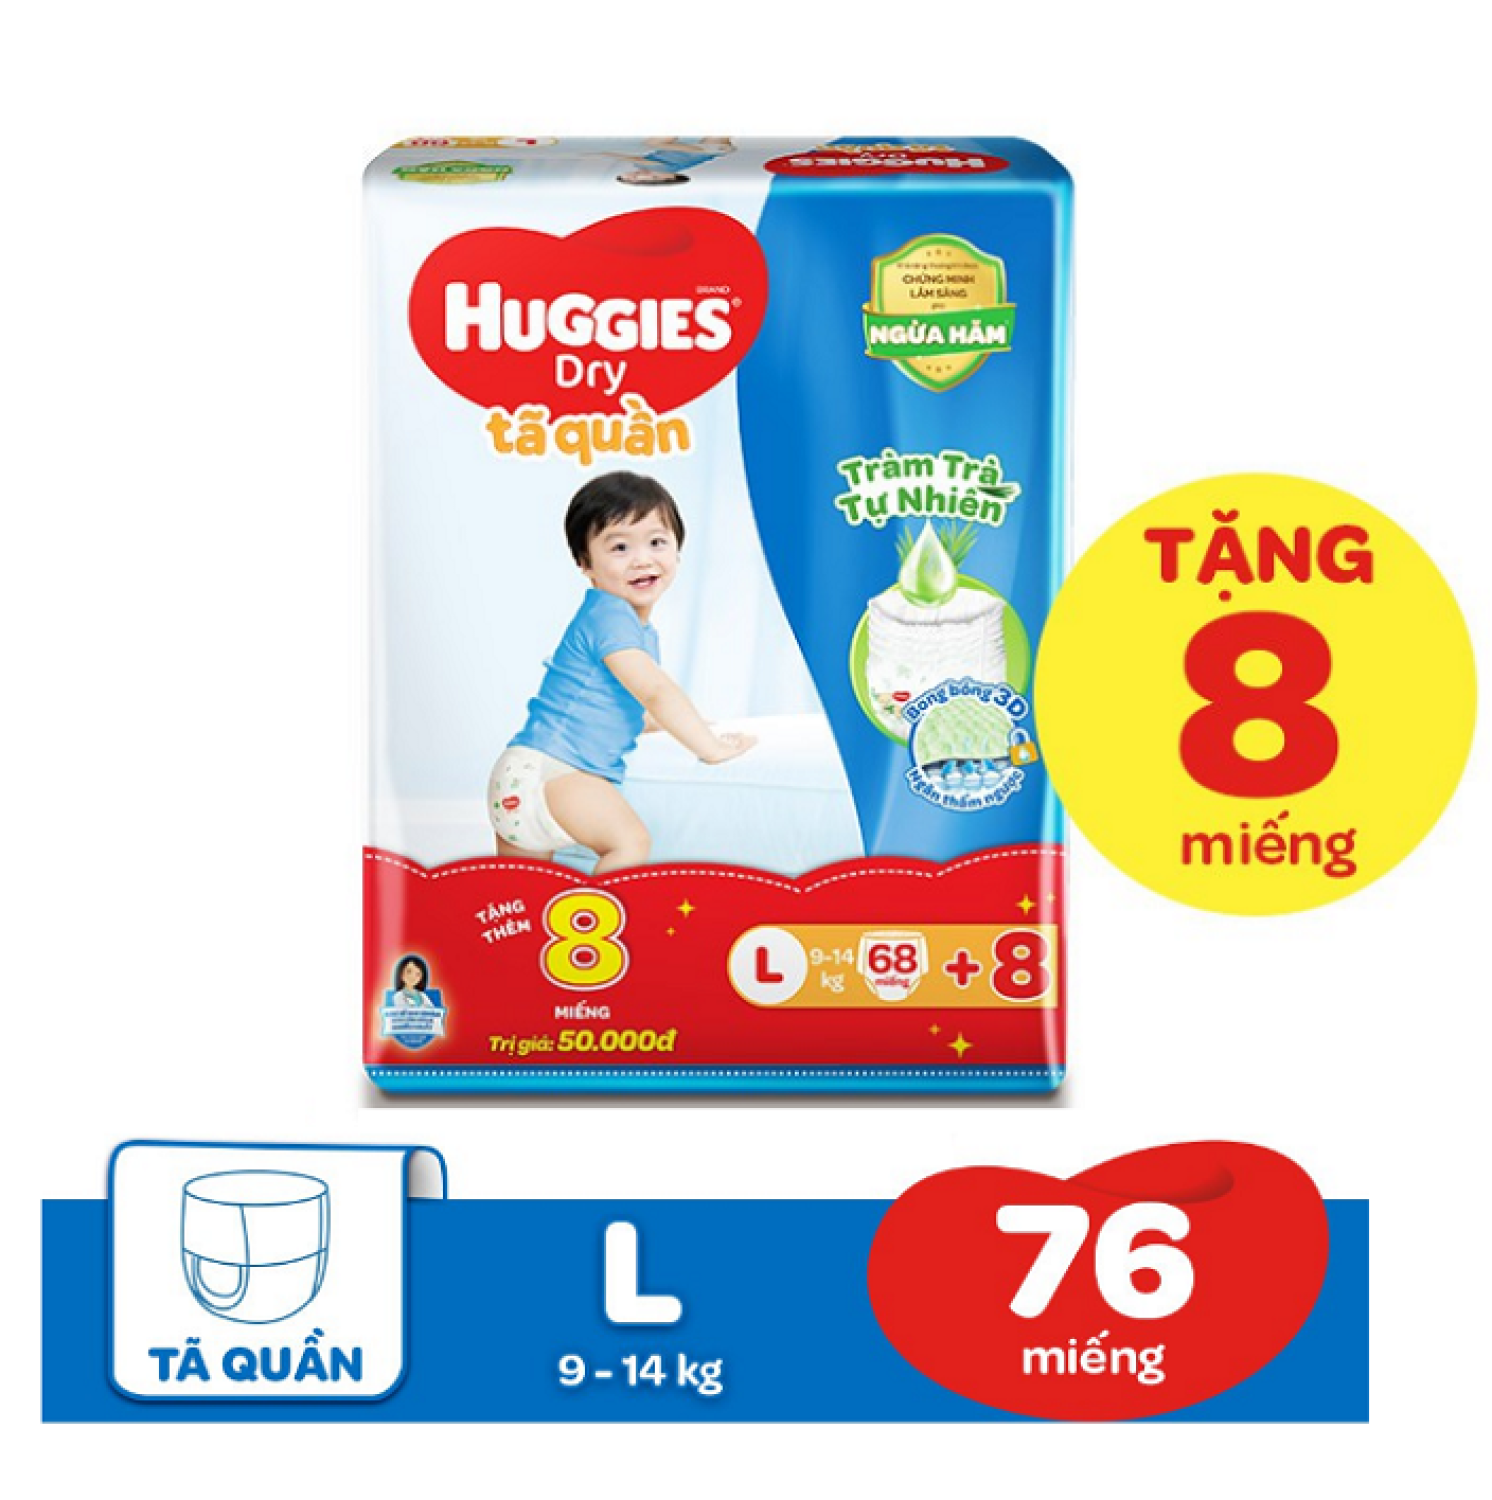 5 Important Questions to Ask When Choosing a Diaper for your Little One and  Why We Prefer Huggies Platinum Pants! ​ - Milton Goh Blog